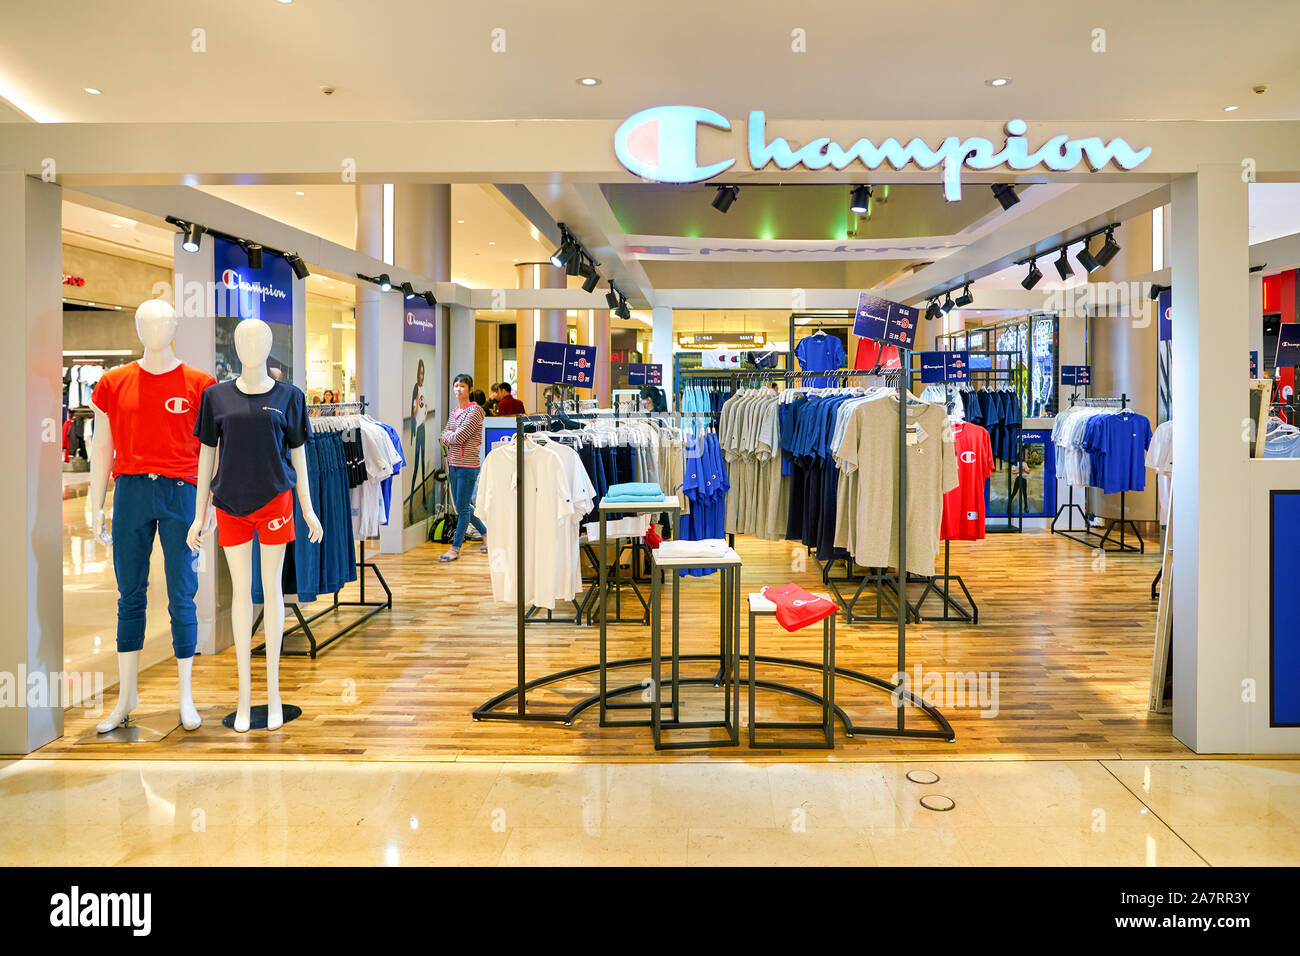 champion factory outlet